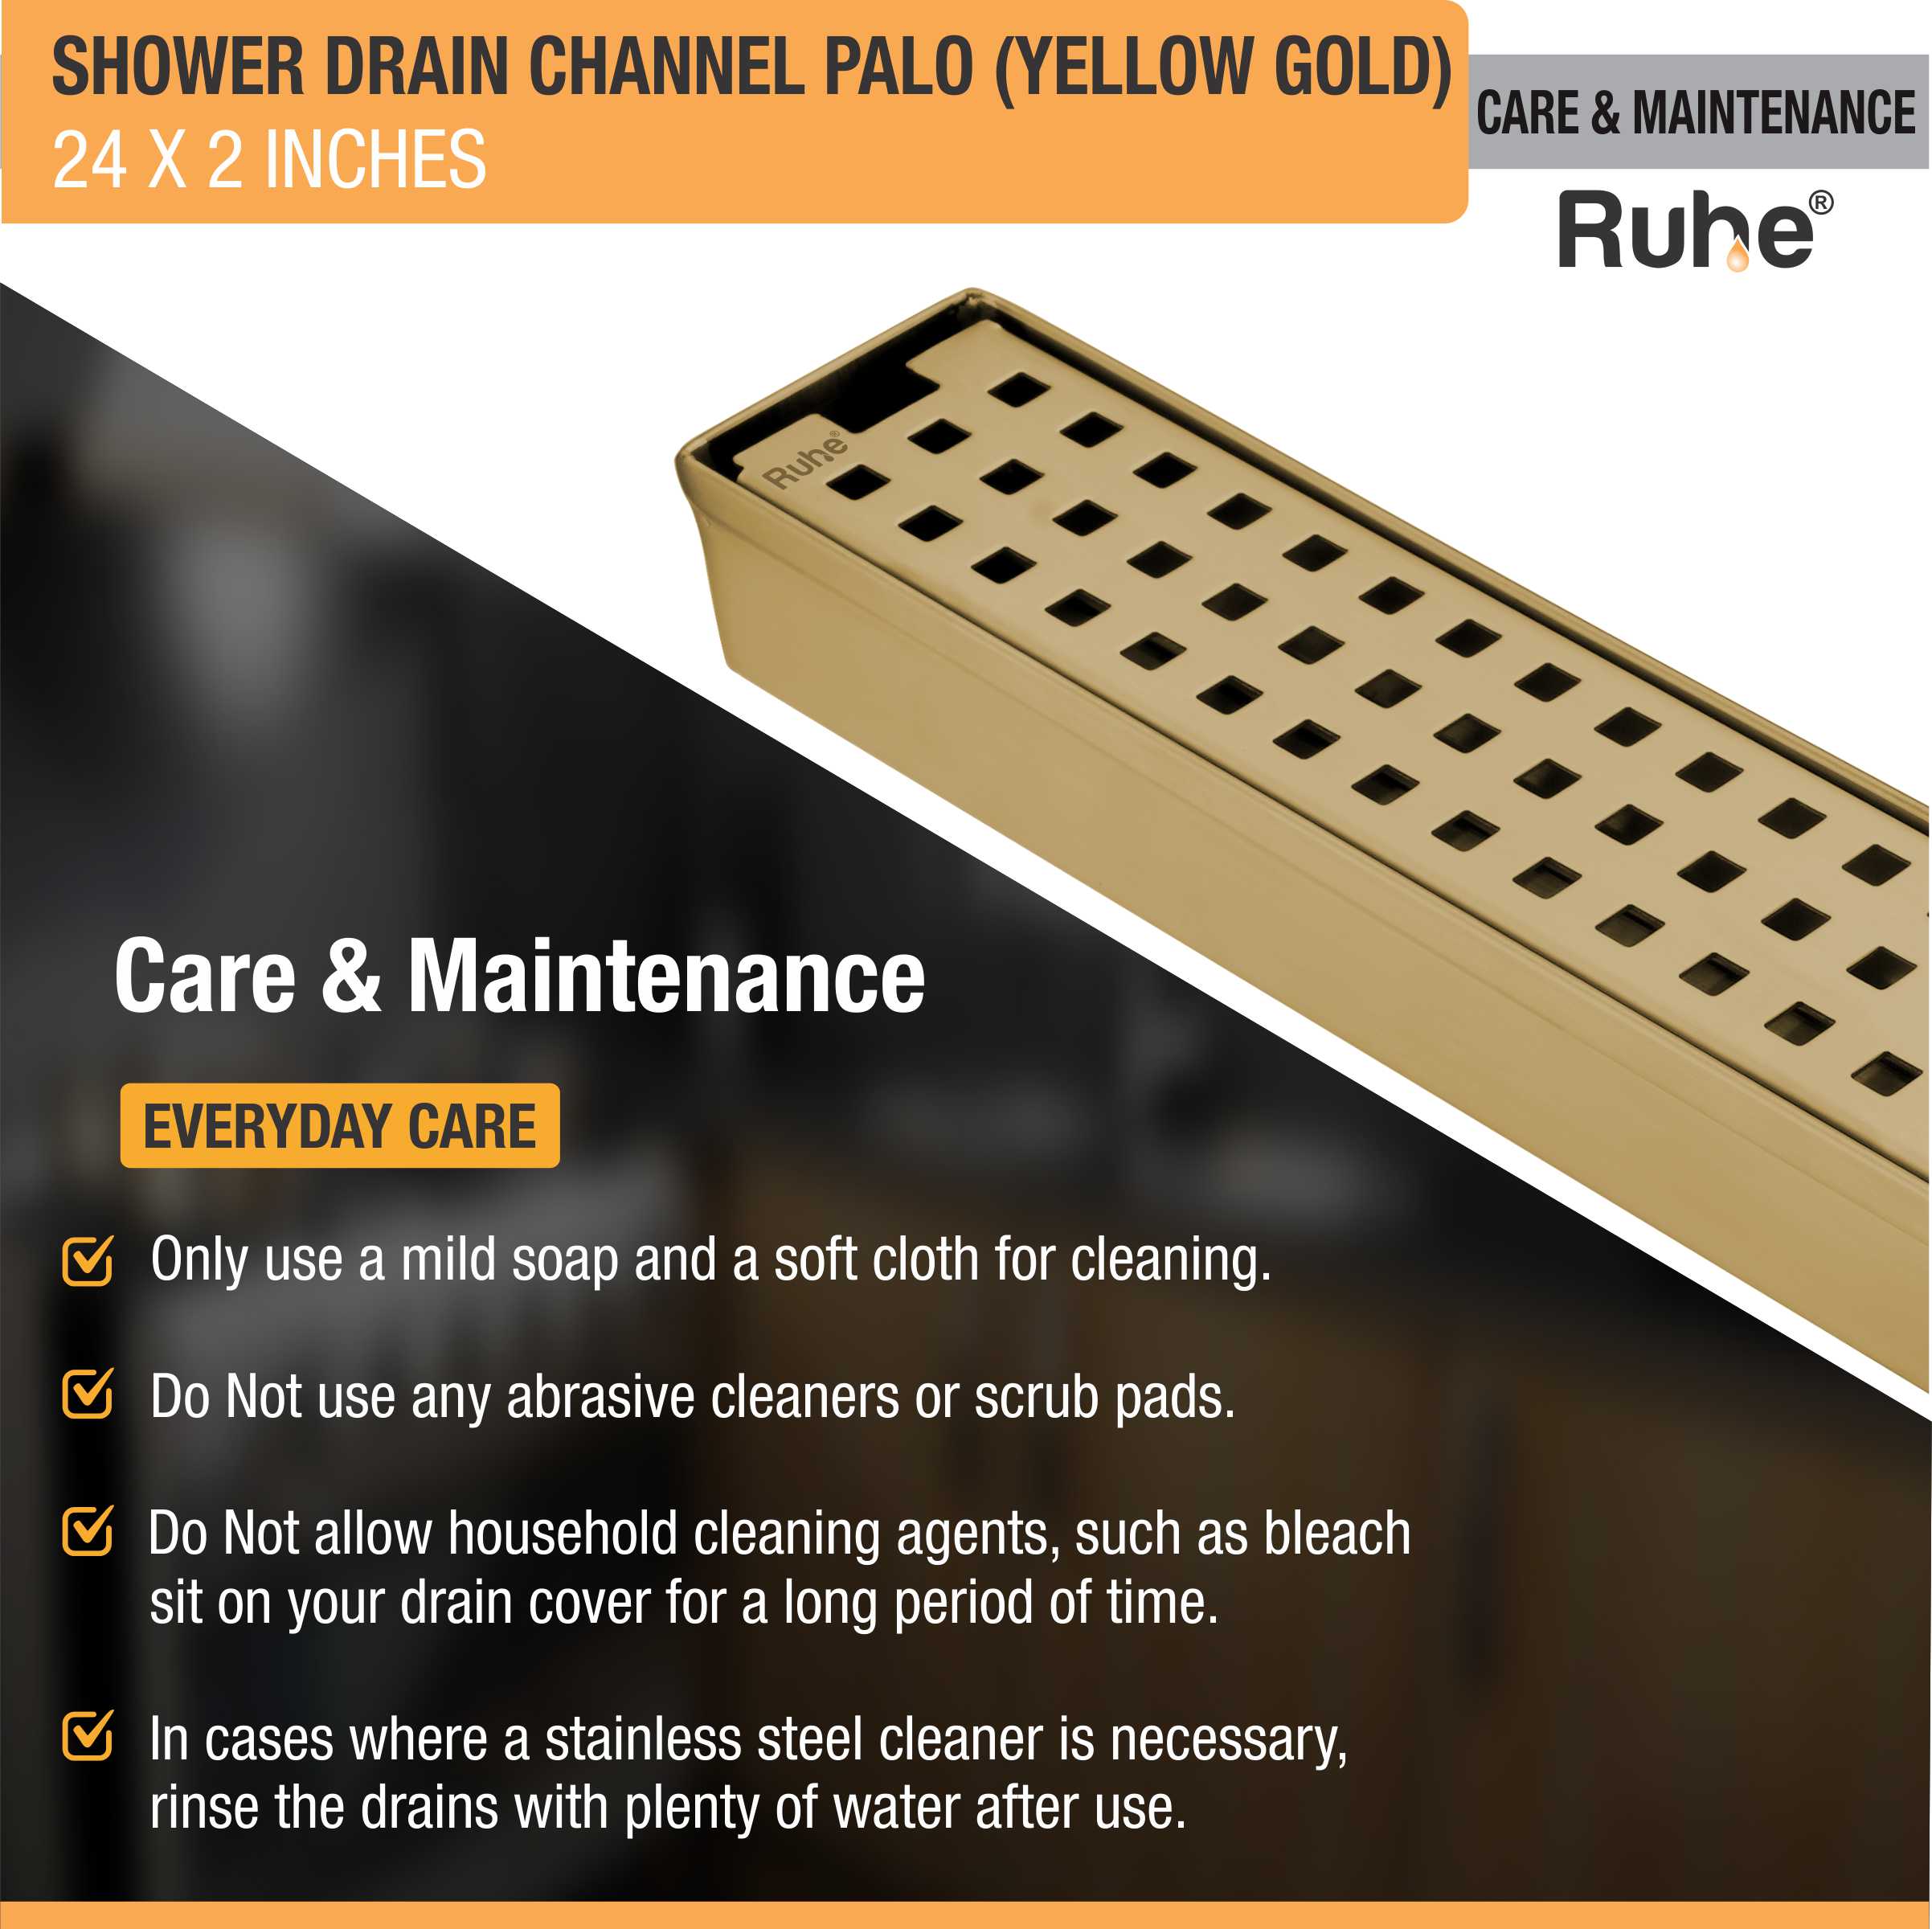 Palo Shower Drain Channel (24 x 2 Inches) YELLOW GOLD care and maintenance